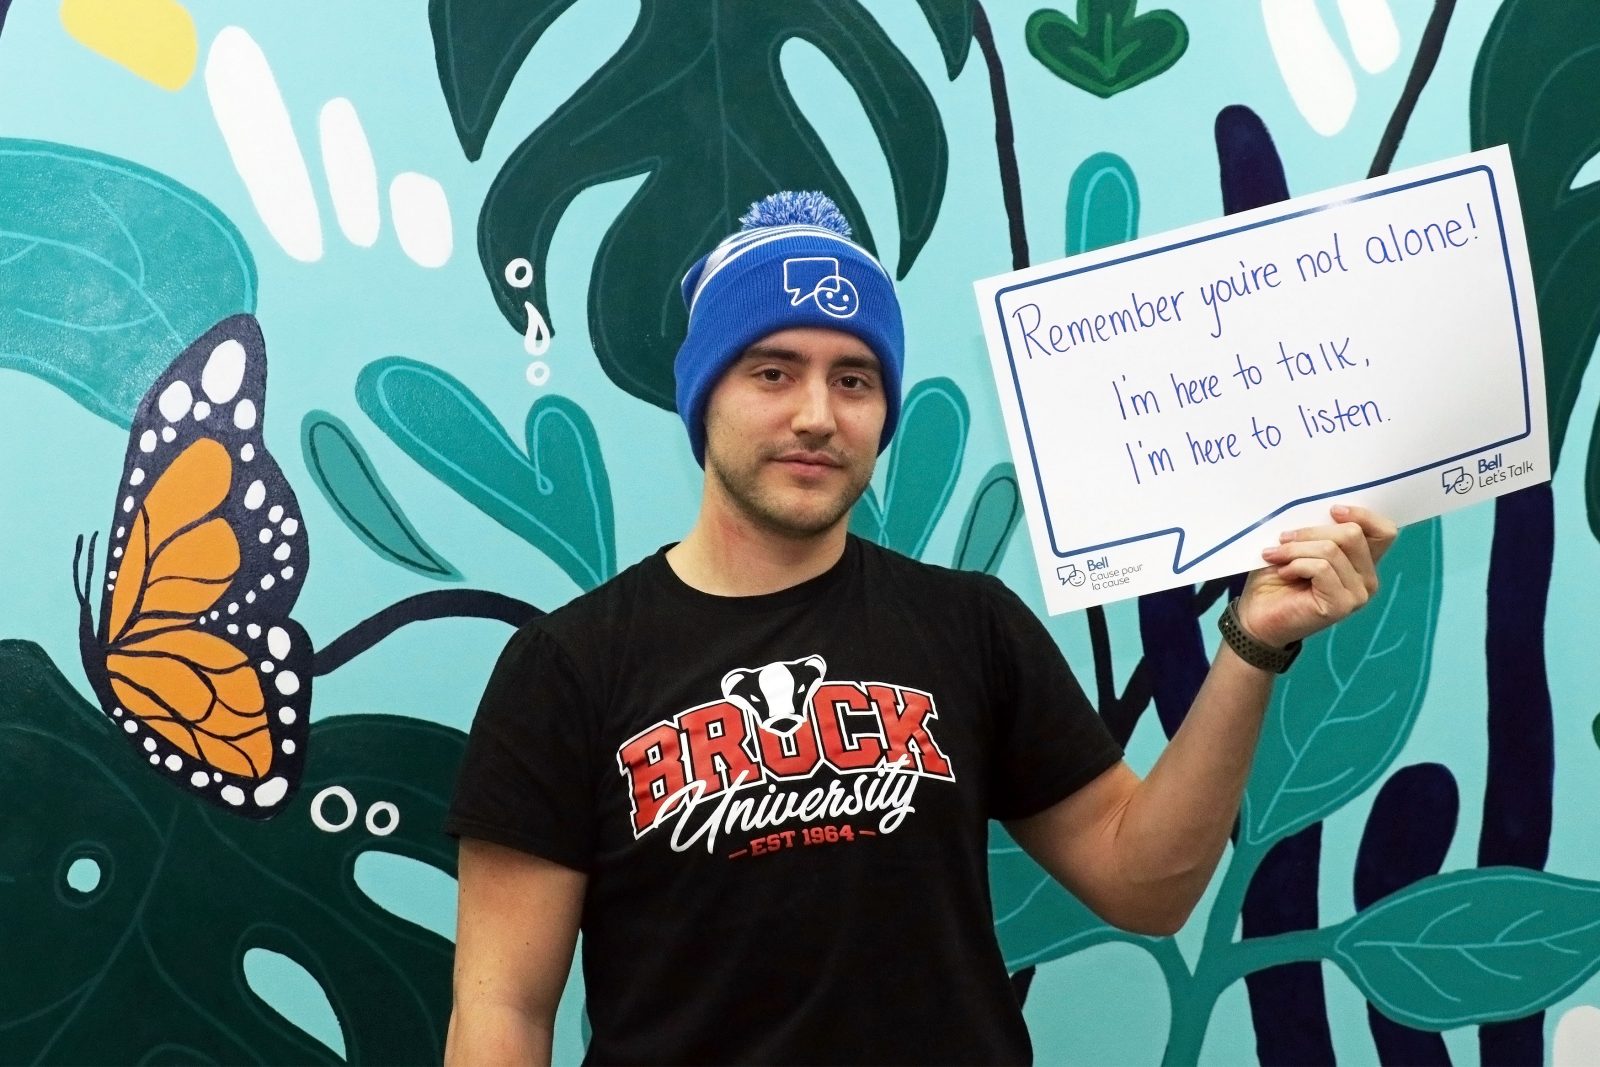 Brock University student Andrew Sheehan holds up a message of support he has written on a paper conversation bubble. He is wearing a Brock University T-shirt and Bell Let’s Talk Day toque. The message reads “Remember you’re not alone! I’m here to talk. I’m here to listen.”